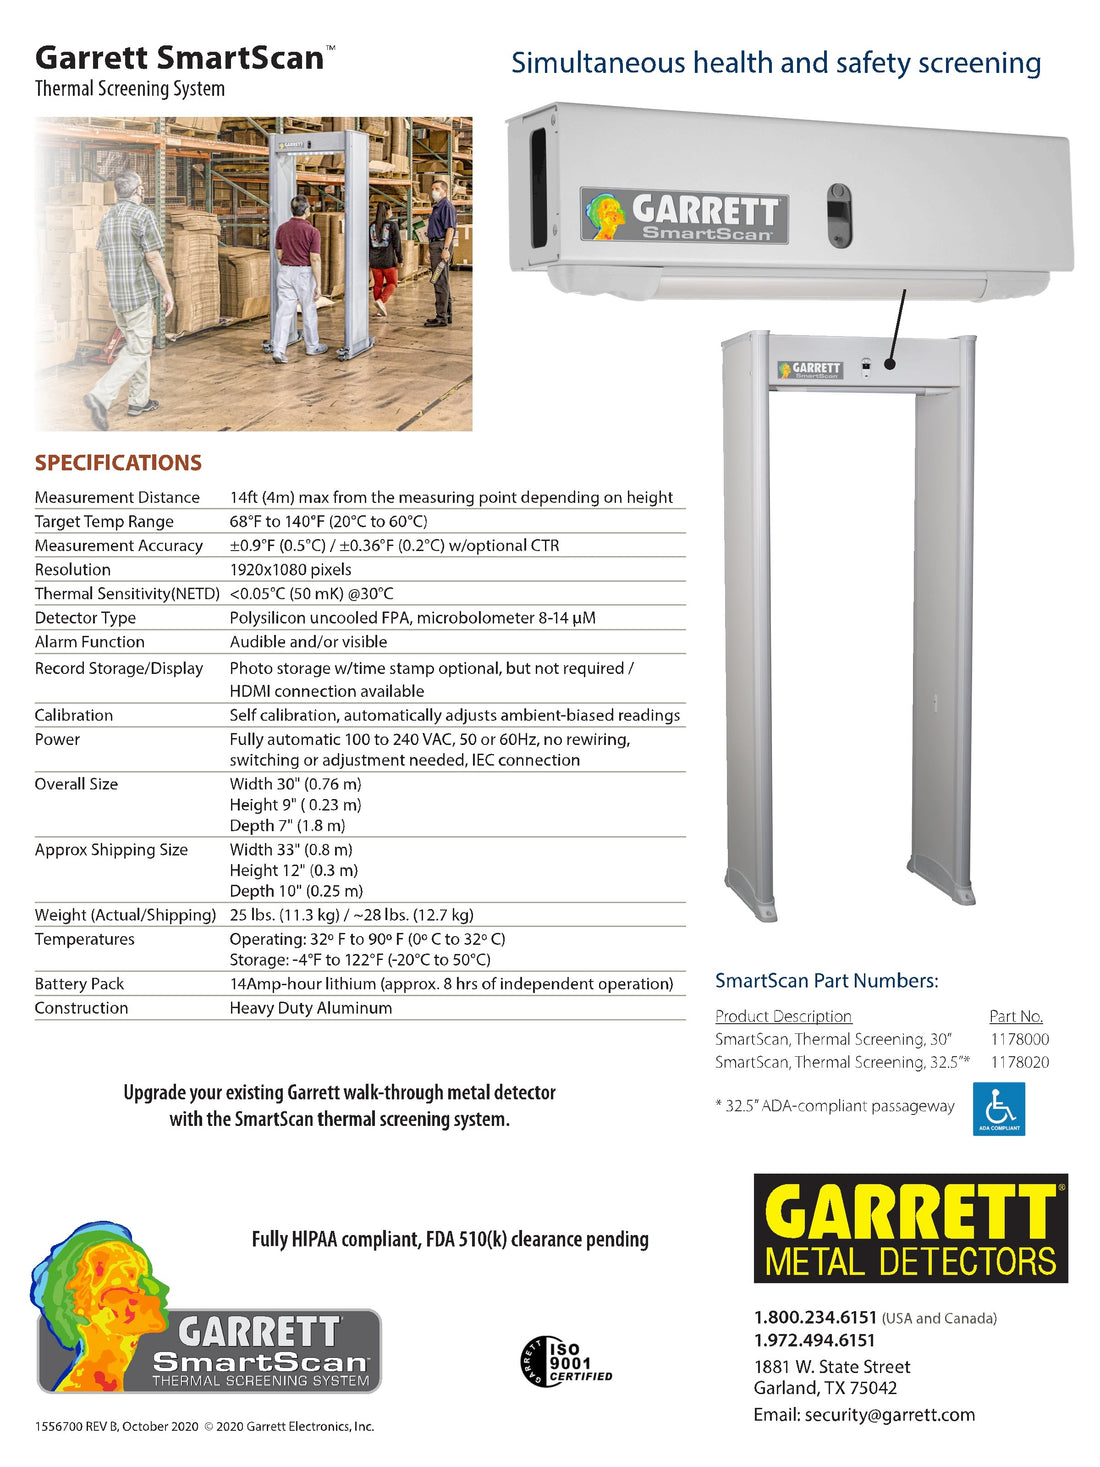 Garrett SmartScan 30" Thermal Screening Add-On for PD 6500i and Multi Zone Specifications B